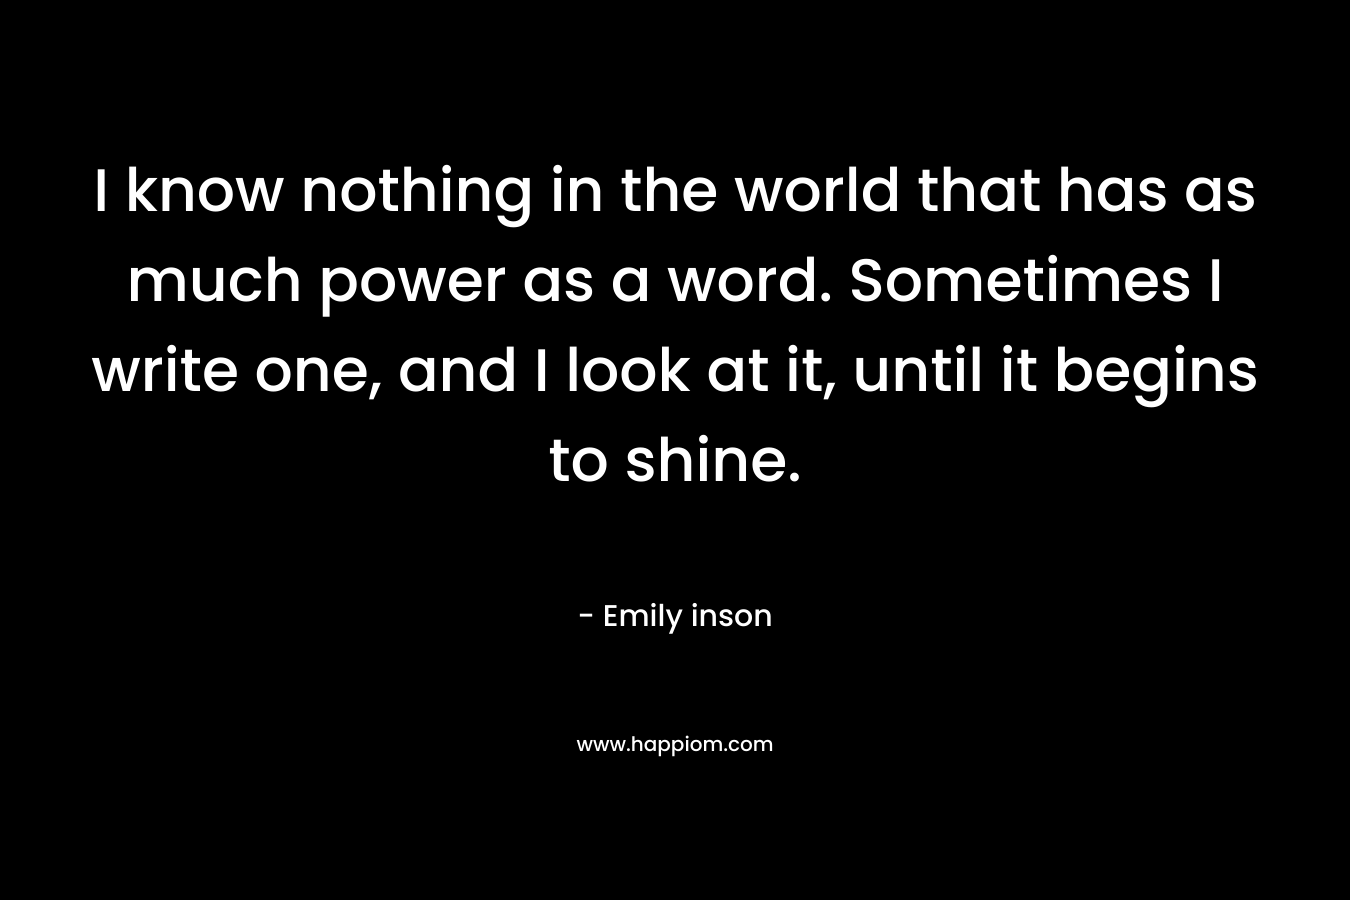 I know nothing in the world that has as much power as a word. Sometimes I write one, and I look at it, until it begins to shine.